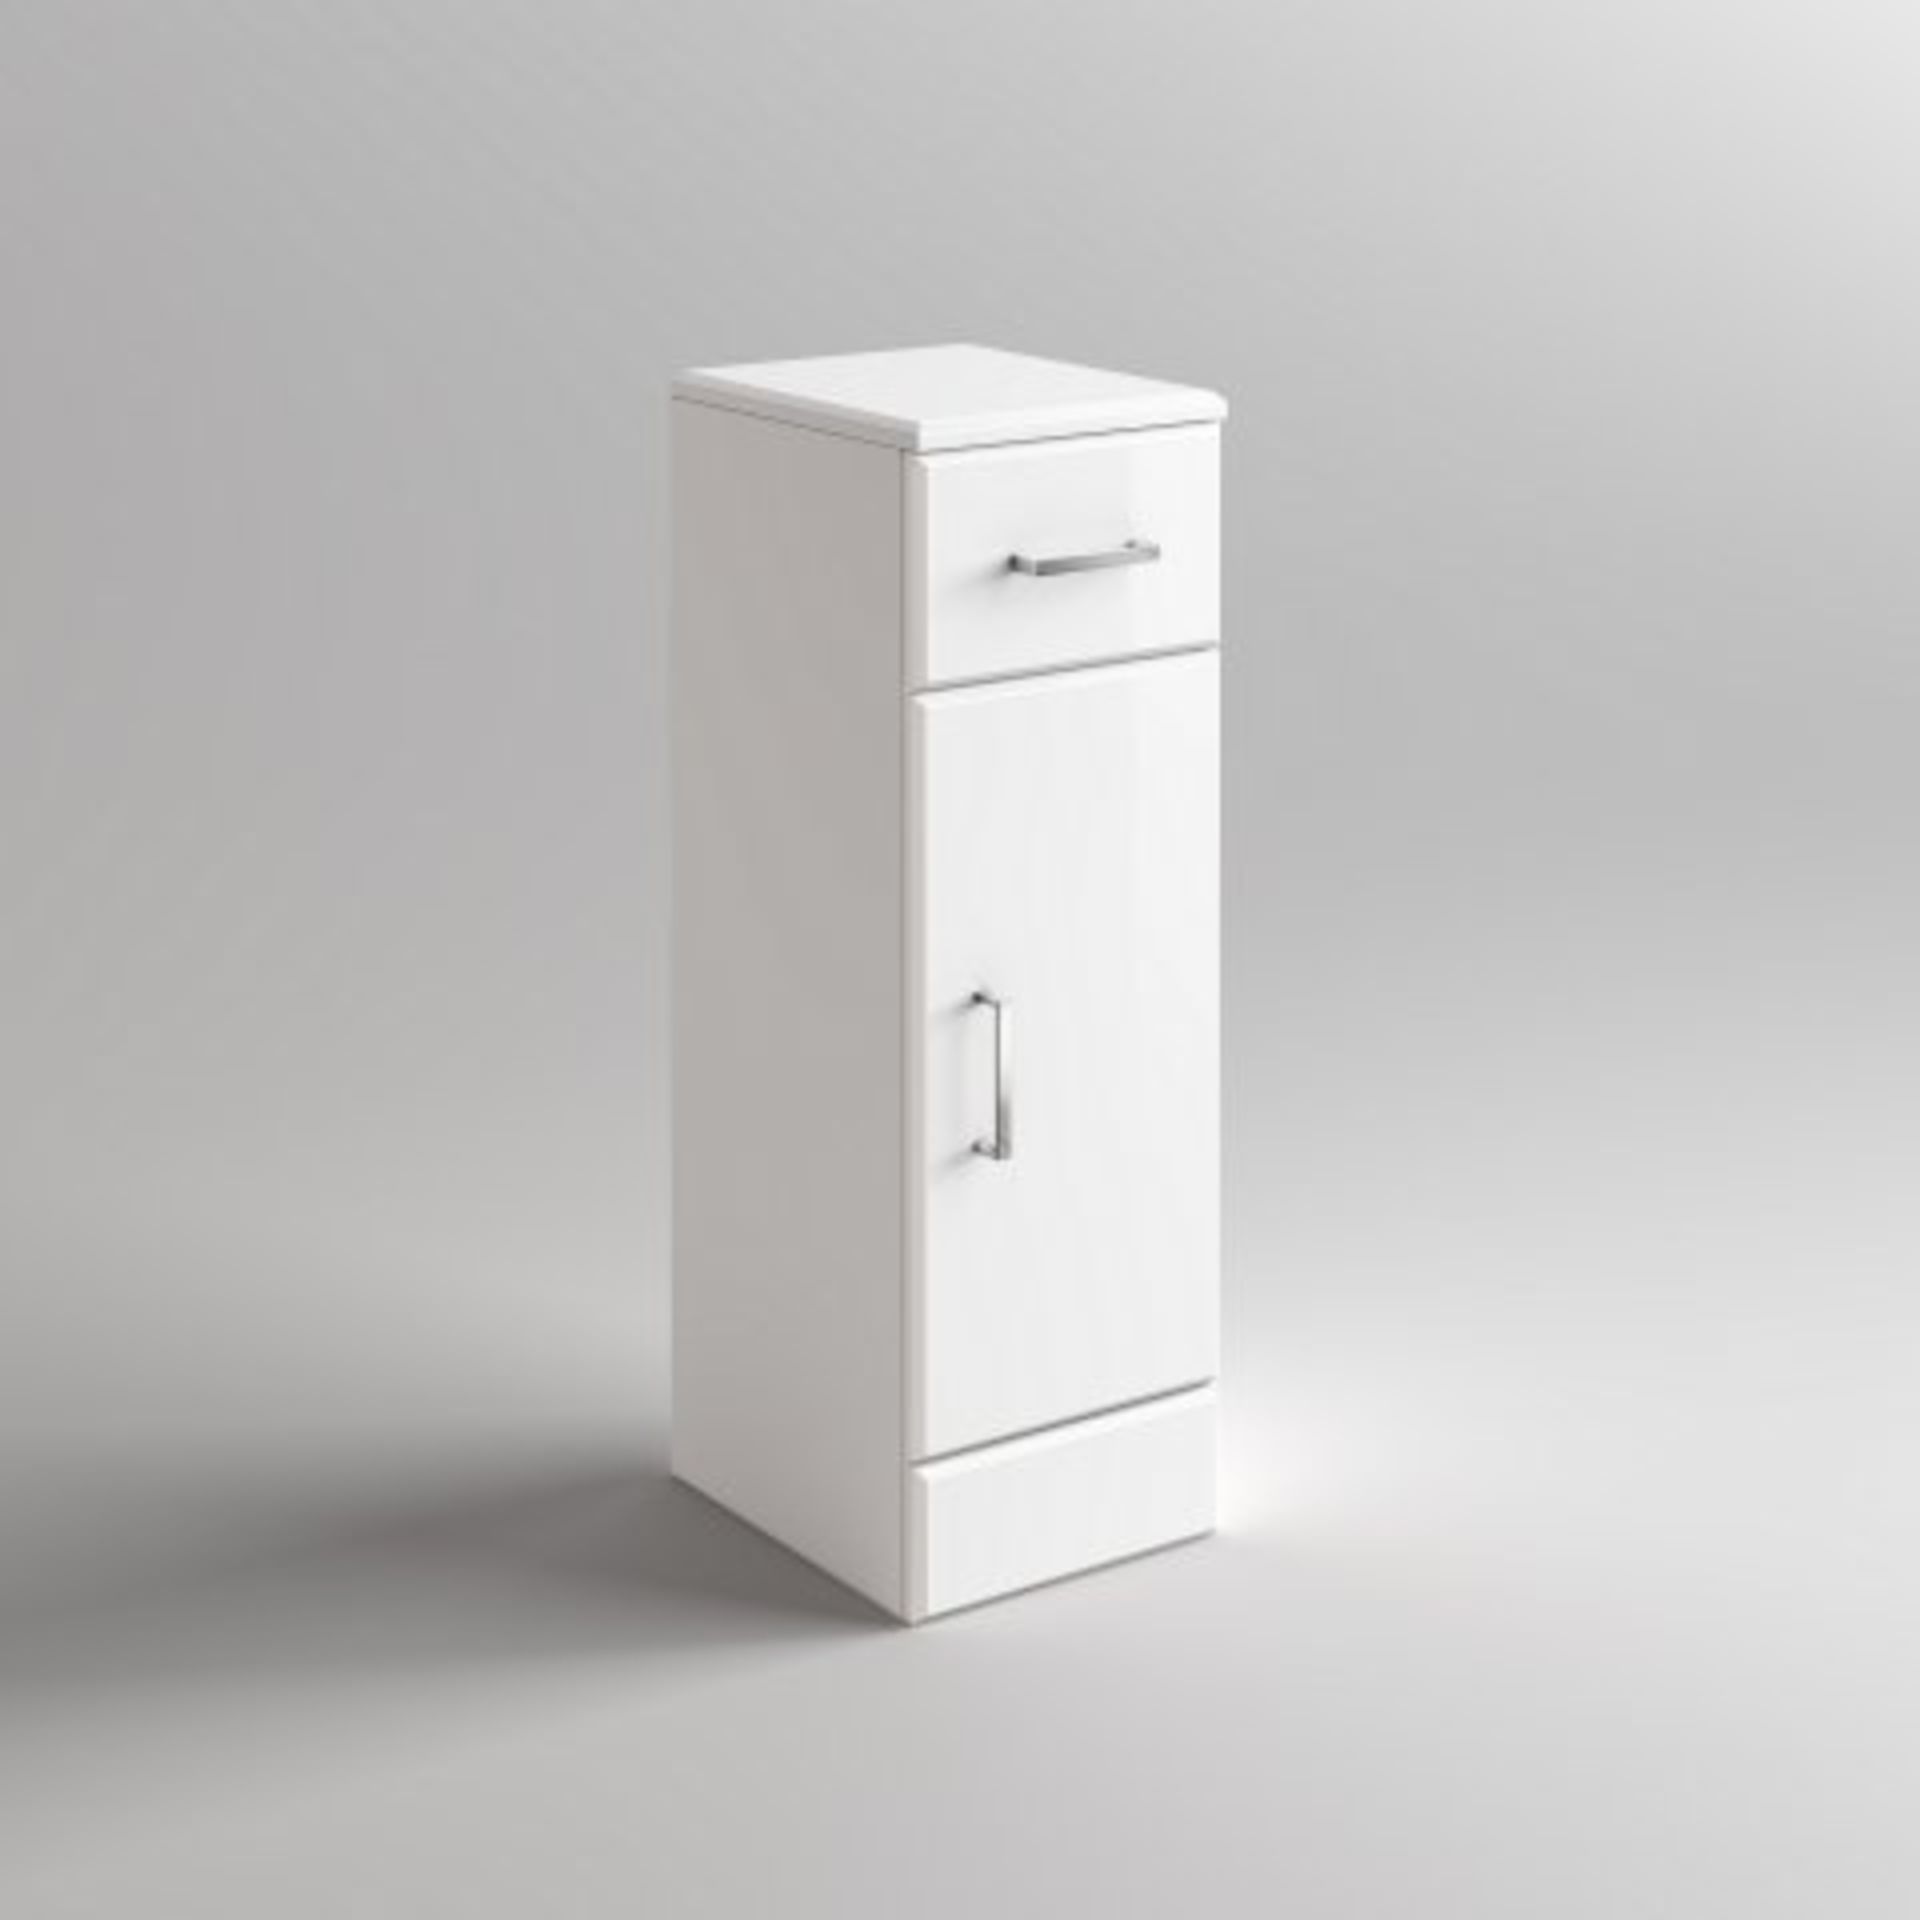 N53 - 250x330mm Quartz Gloss White Small Unit. RRP £143.98. This state-of-the-art white bathroom - Image 3 of 3